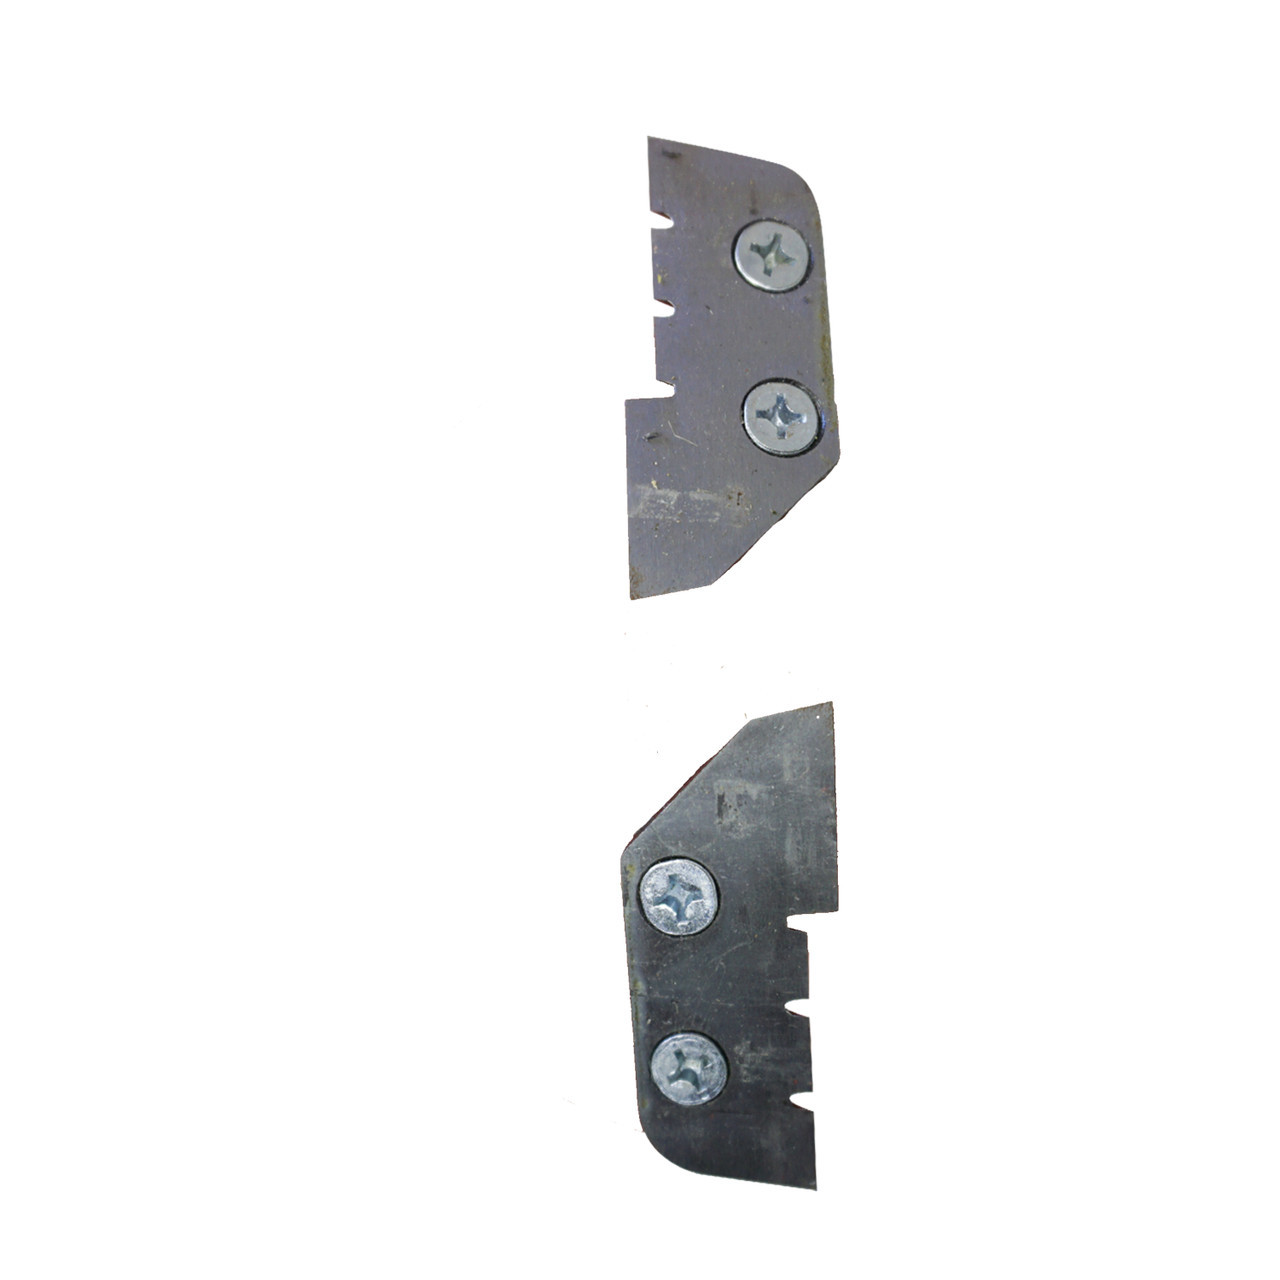 Ht Siberian Tiger 8" Replacement Blades